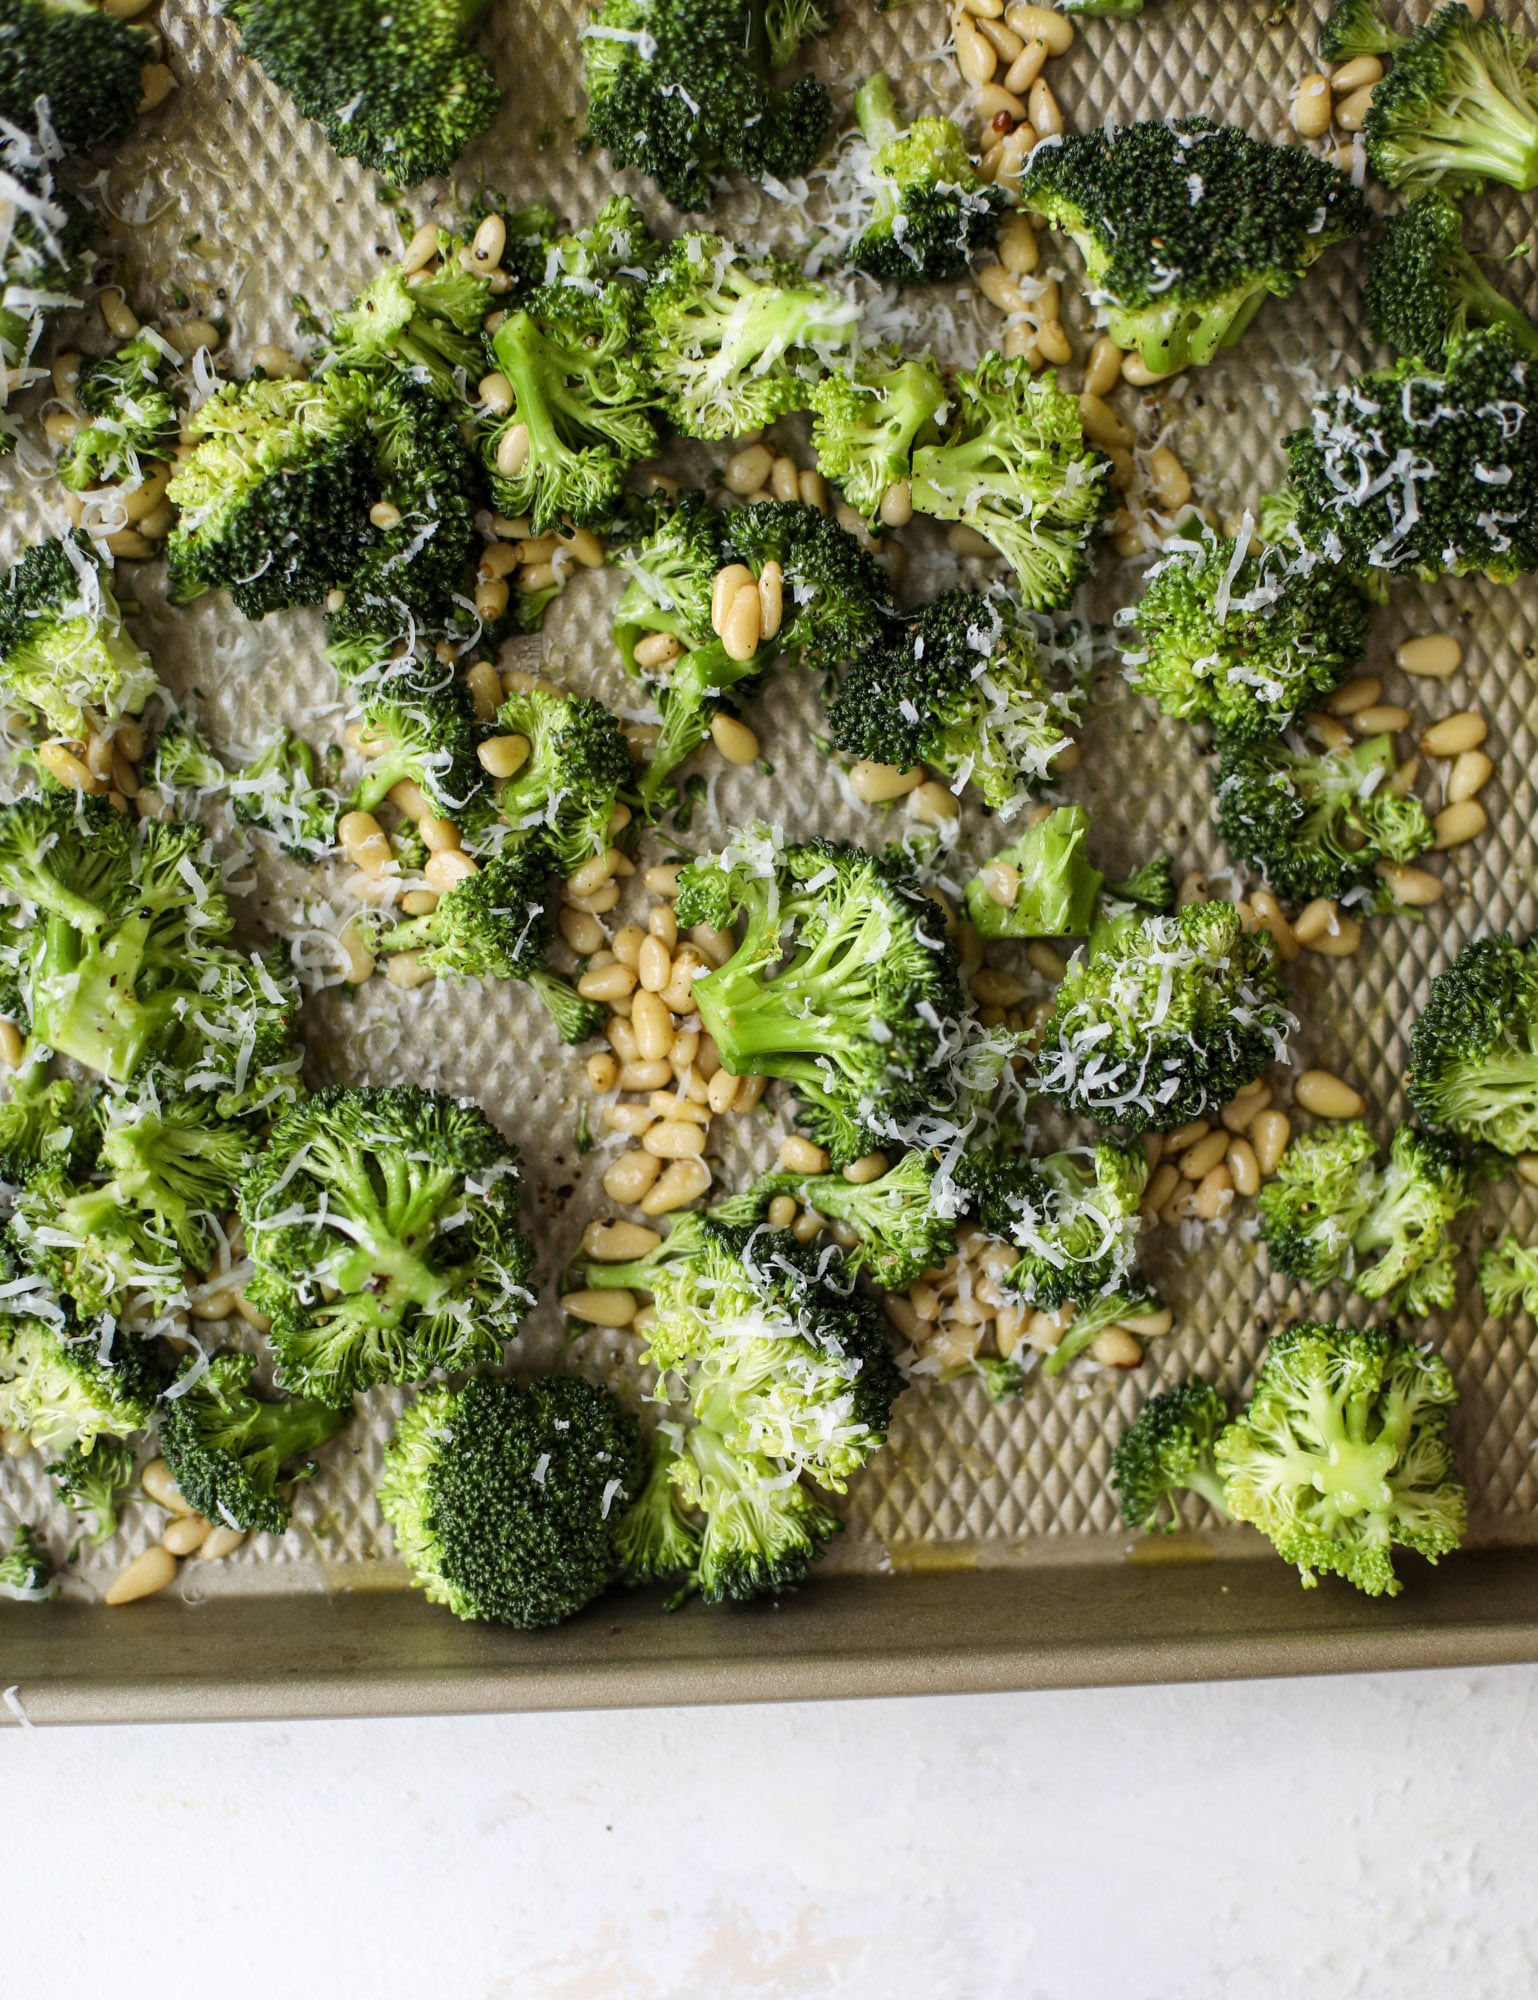 This parmesan roasted broccoli is irresistiable and will turn even the biggest broccoli haters into broccoli lovers! Major flavor in this roasted broccoli! I howsweeteats.com #parmesan #roastedbroccoli